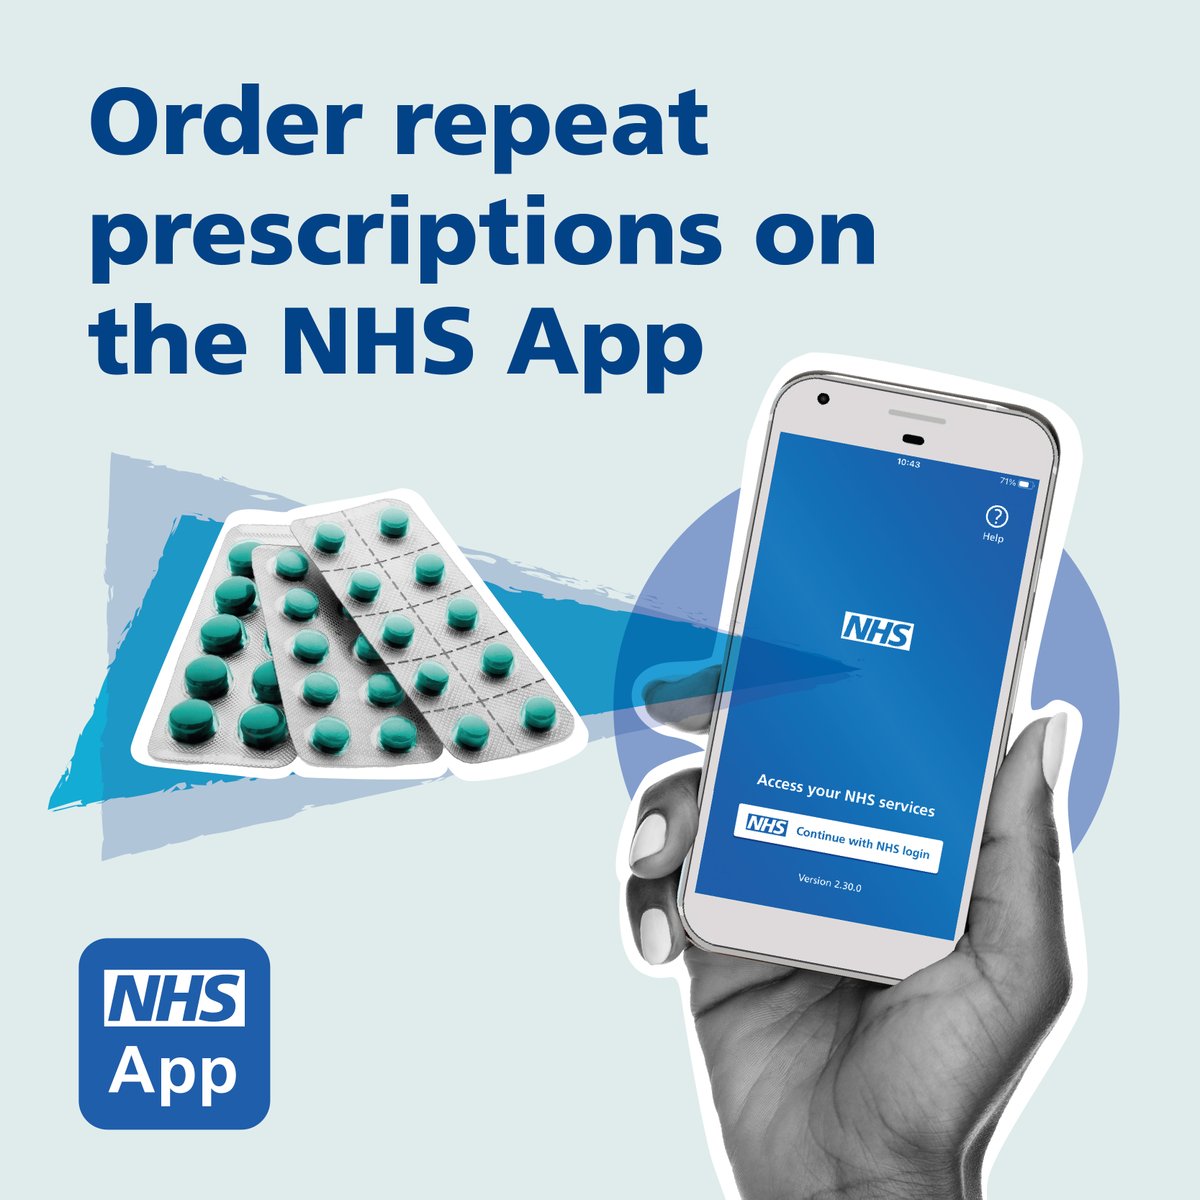 Did you know you can manage repeat prescriptions from in the NHS App? You can easily change your nominated pharmacy and send orders when it’s convenient for you. Find out more: nhs.uk/nhsapp